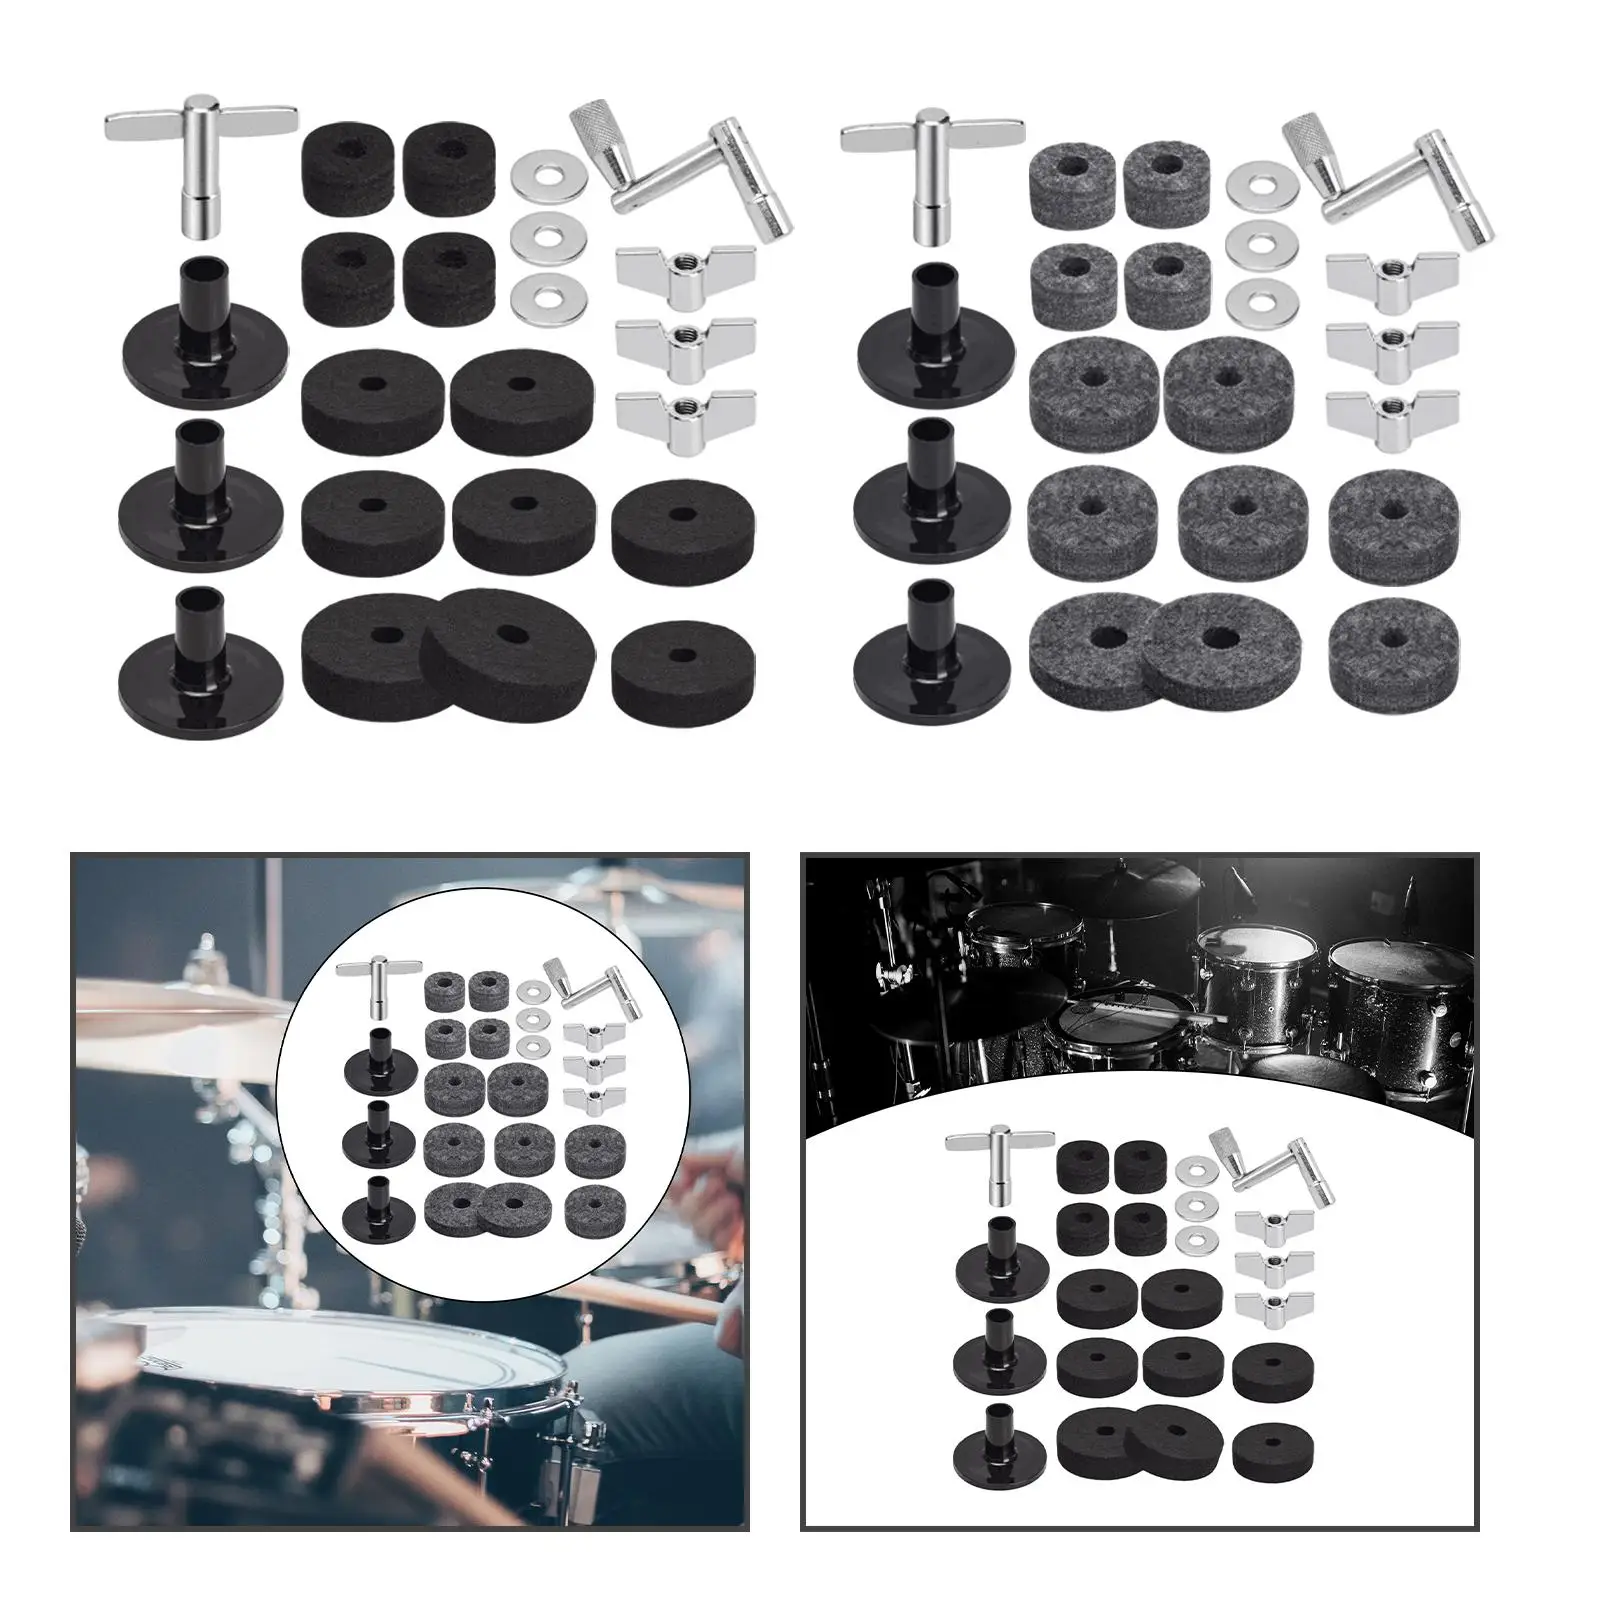 23 Pieces Cymbal Replacement Accessory for Drum Set Cymbal Sleeve and Felt